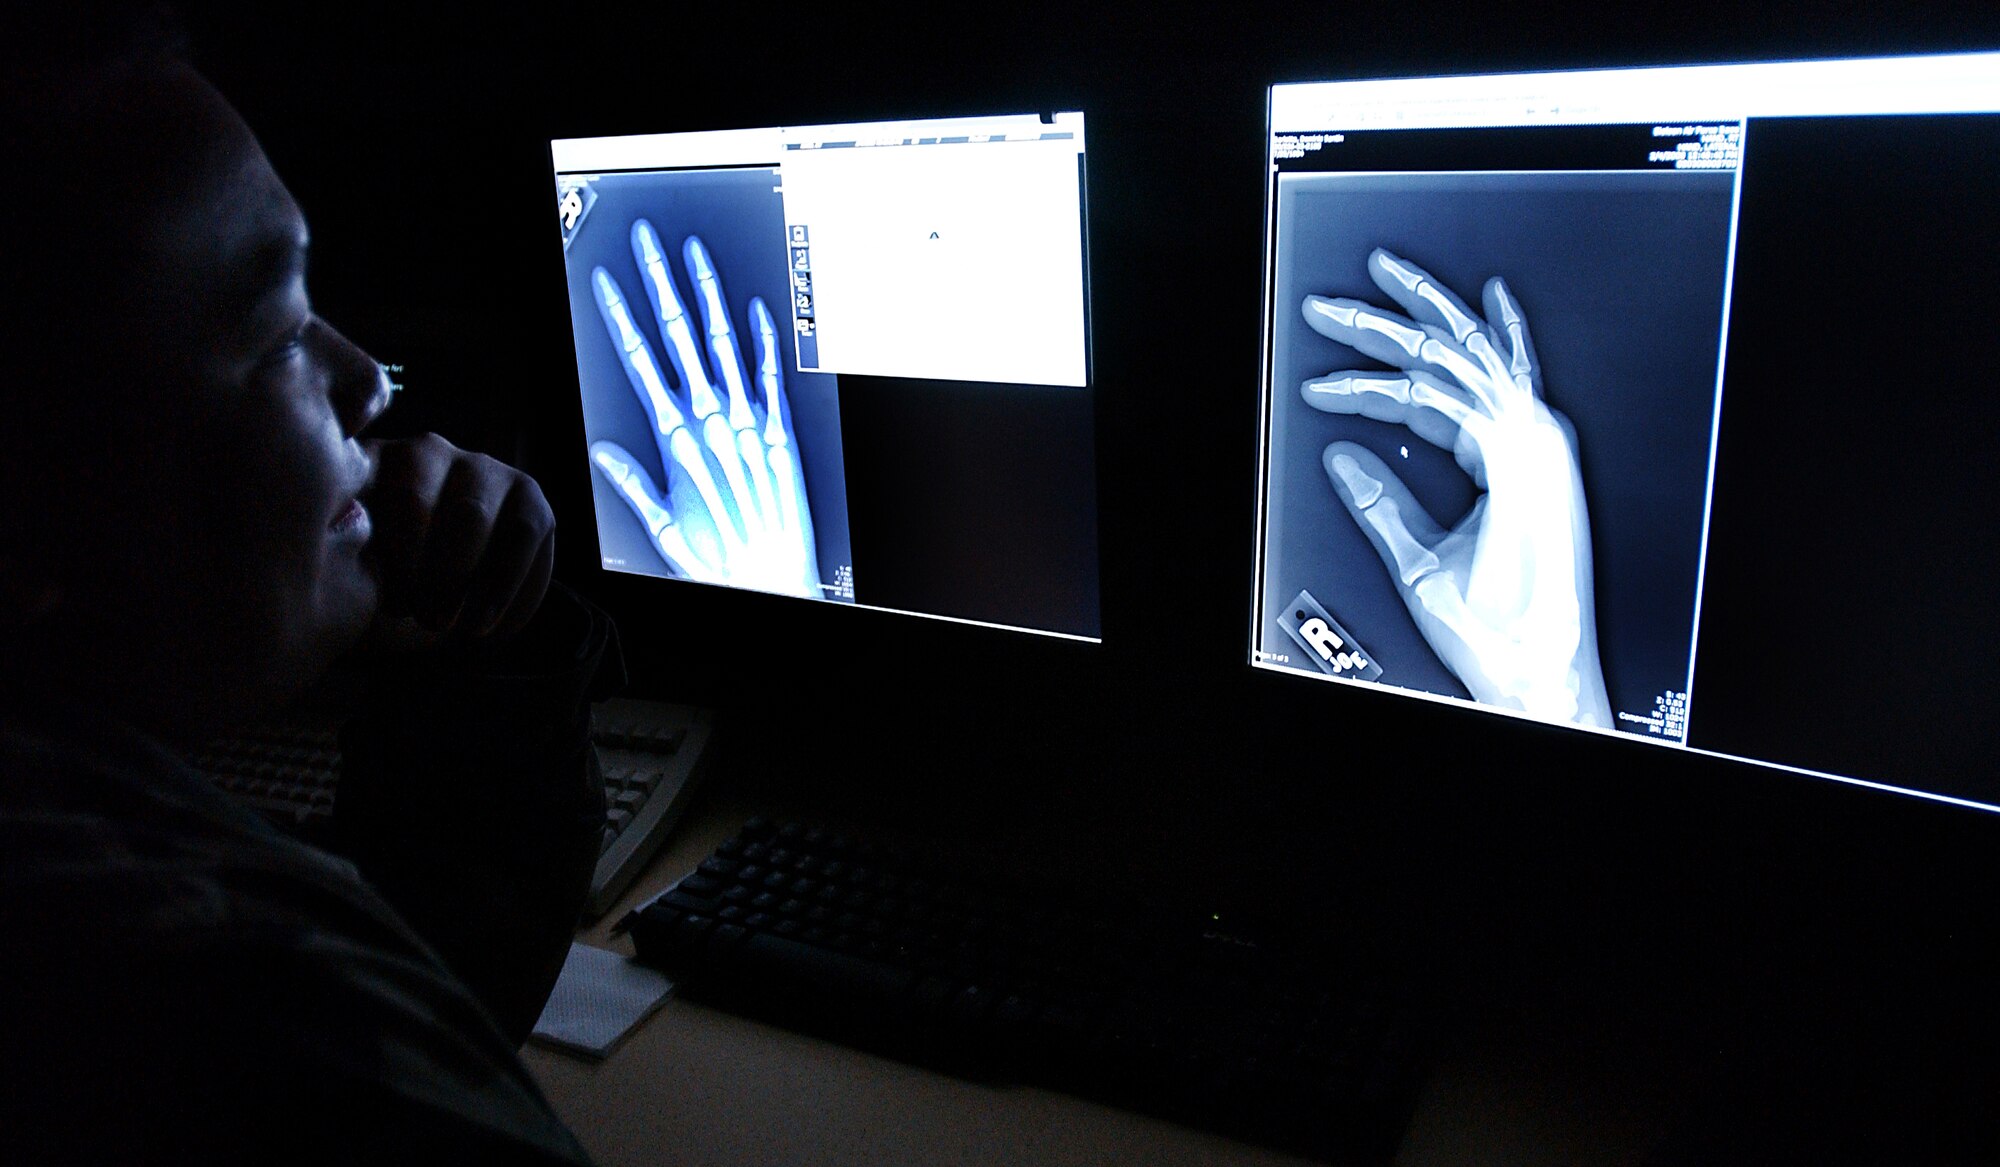 U.S Air Force Staff Sgt. Rutherford Alejo, a Diagnostic Imaging Technician assigned to the 354th Medical Group, Eielson Air Force Base, Alaska views and analyzes a processed radiograph of a hand for quality control before sending the images to the physician who requested the x-ray. Each processed radiograph is checked for correct exposure, proper position, and other items to ensure the radiograph is free from any defects and the area being examined is clear based on position and exposure so the physician can make a precise diagnosis.

(U.S Air Force photo by: Staff Sgt Eric T. Sheler)